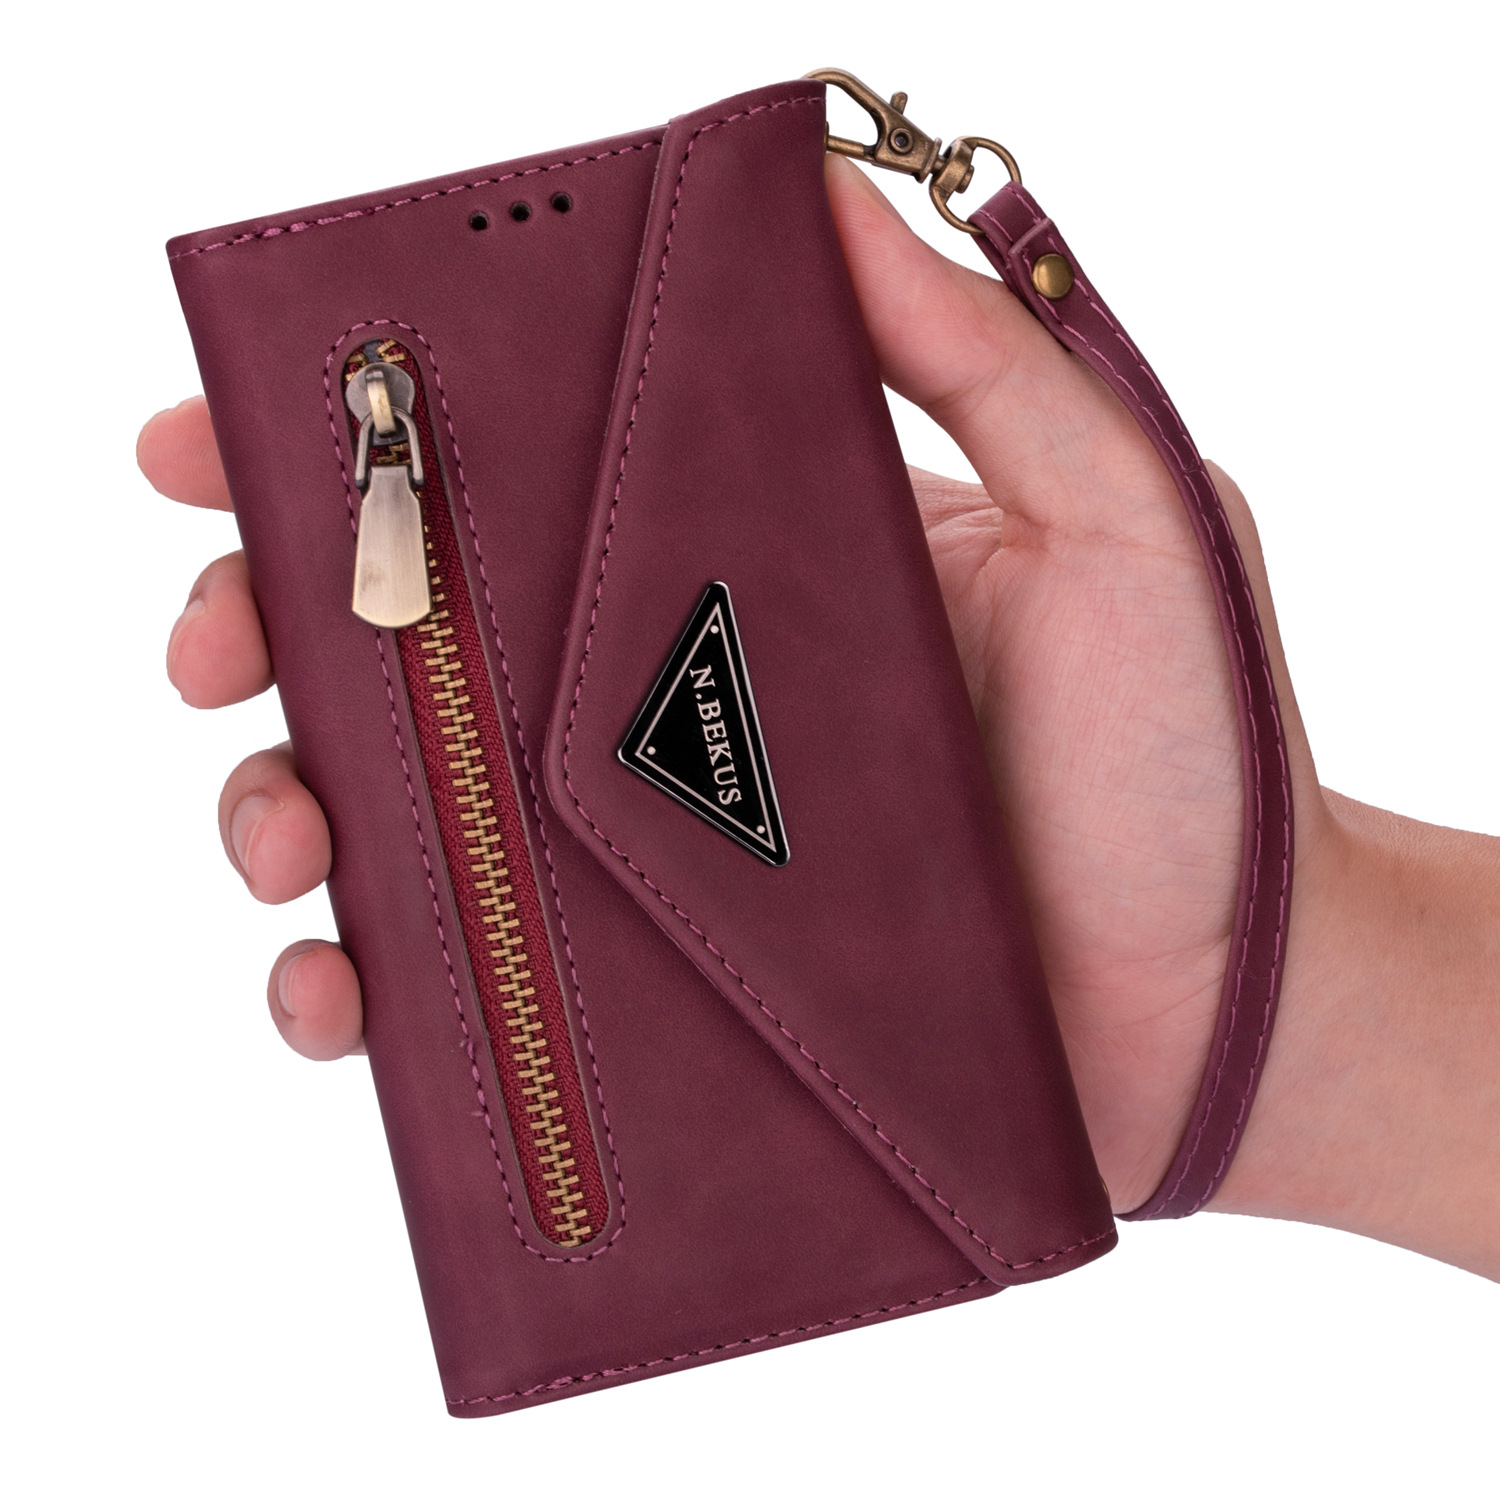 Multifunctional-Flip-with-Multi-Card-Slot-Phone-Wallet-Full-Body-Protective-Case-Handbag-for-iPhone--1842560-4